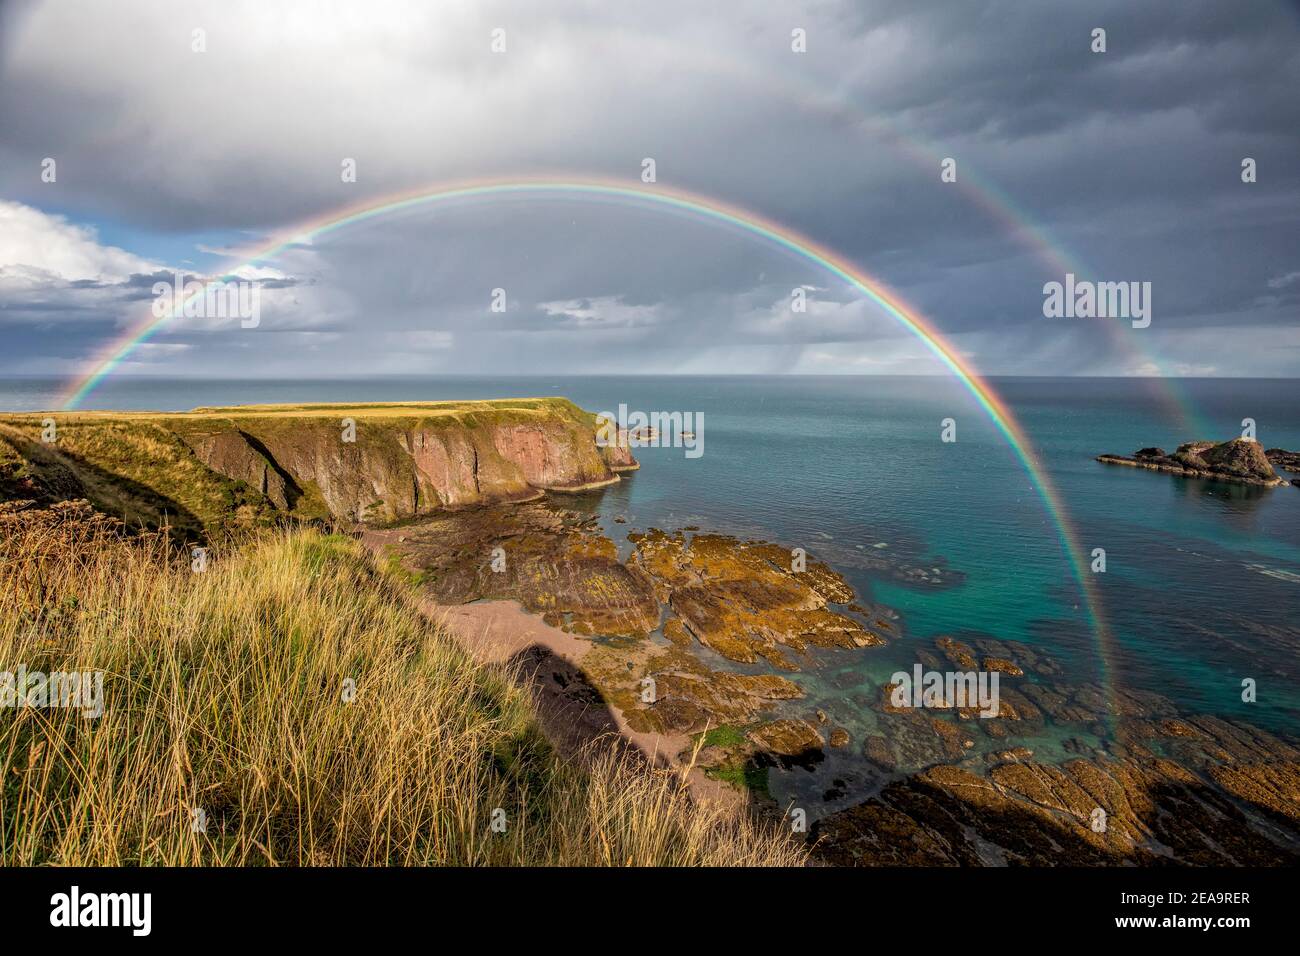 The Scottish coast at Stonehaven looking towards a dramatic sky and two rainbows Stock Photo